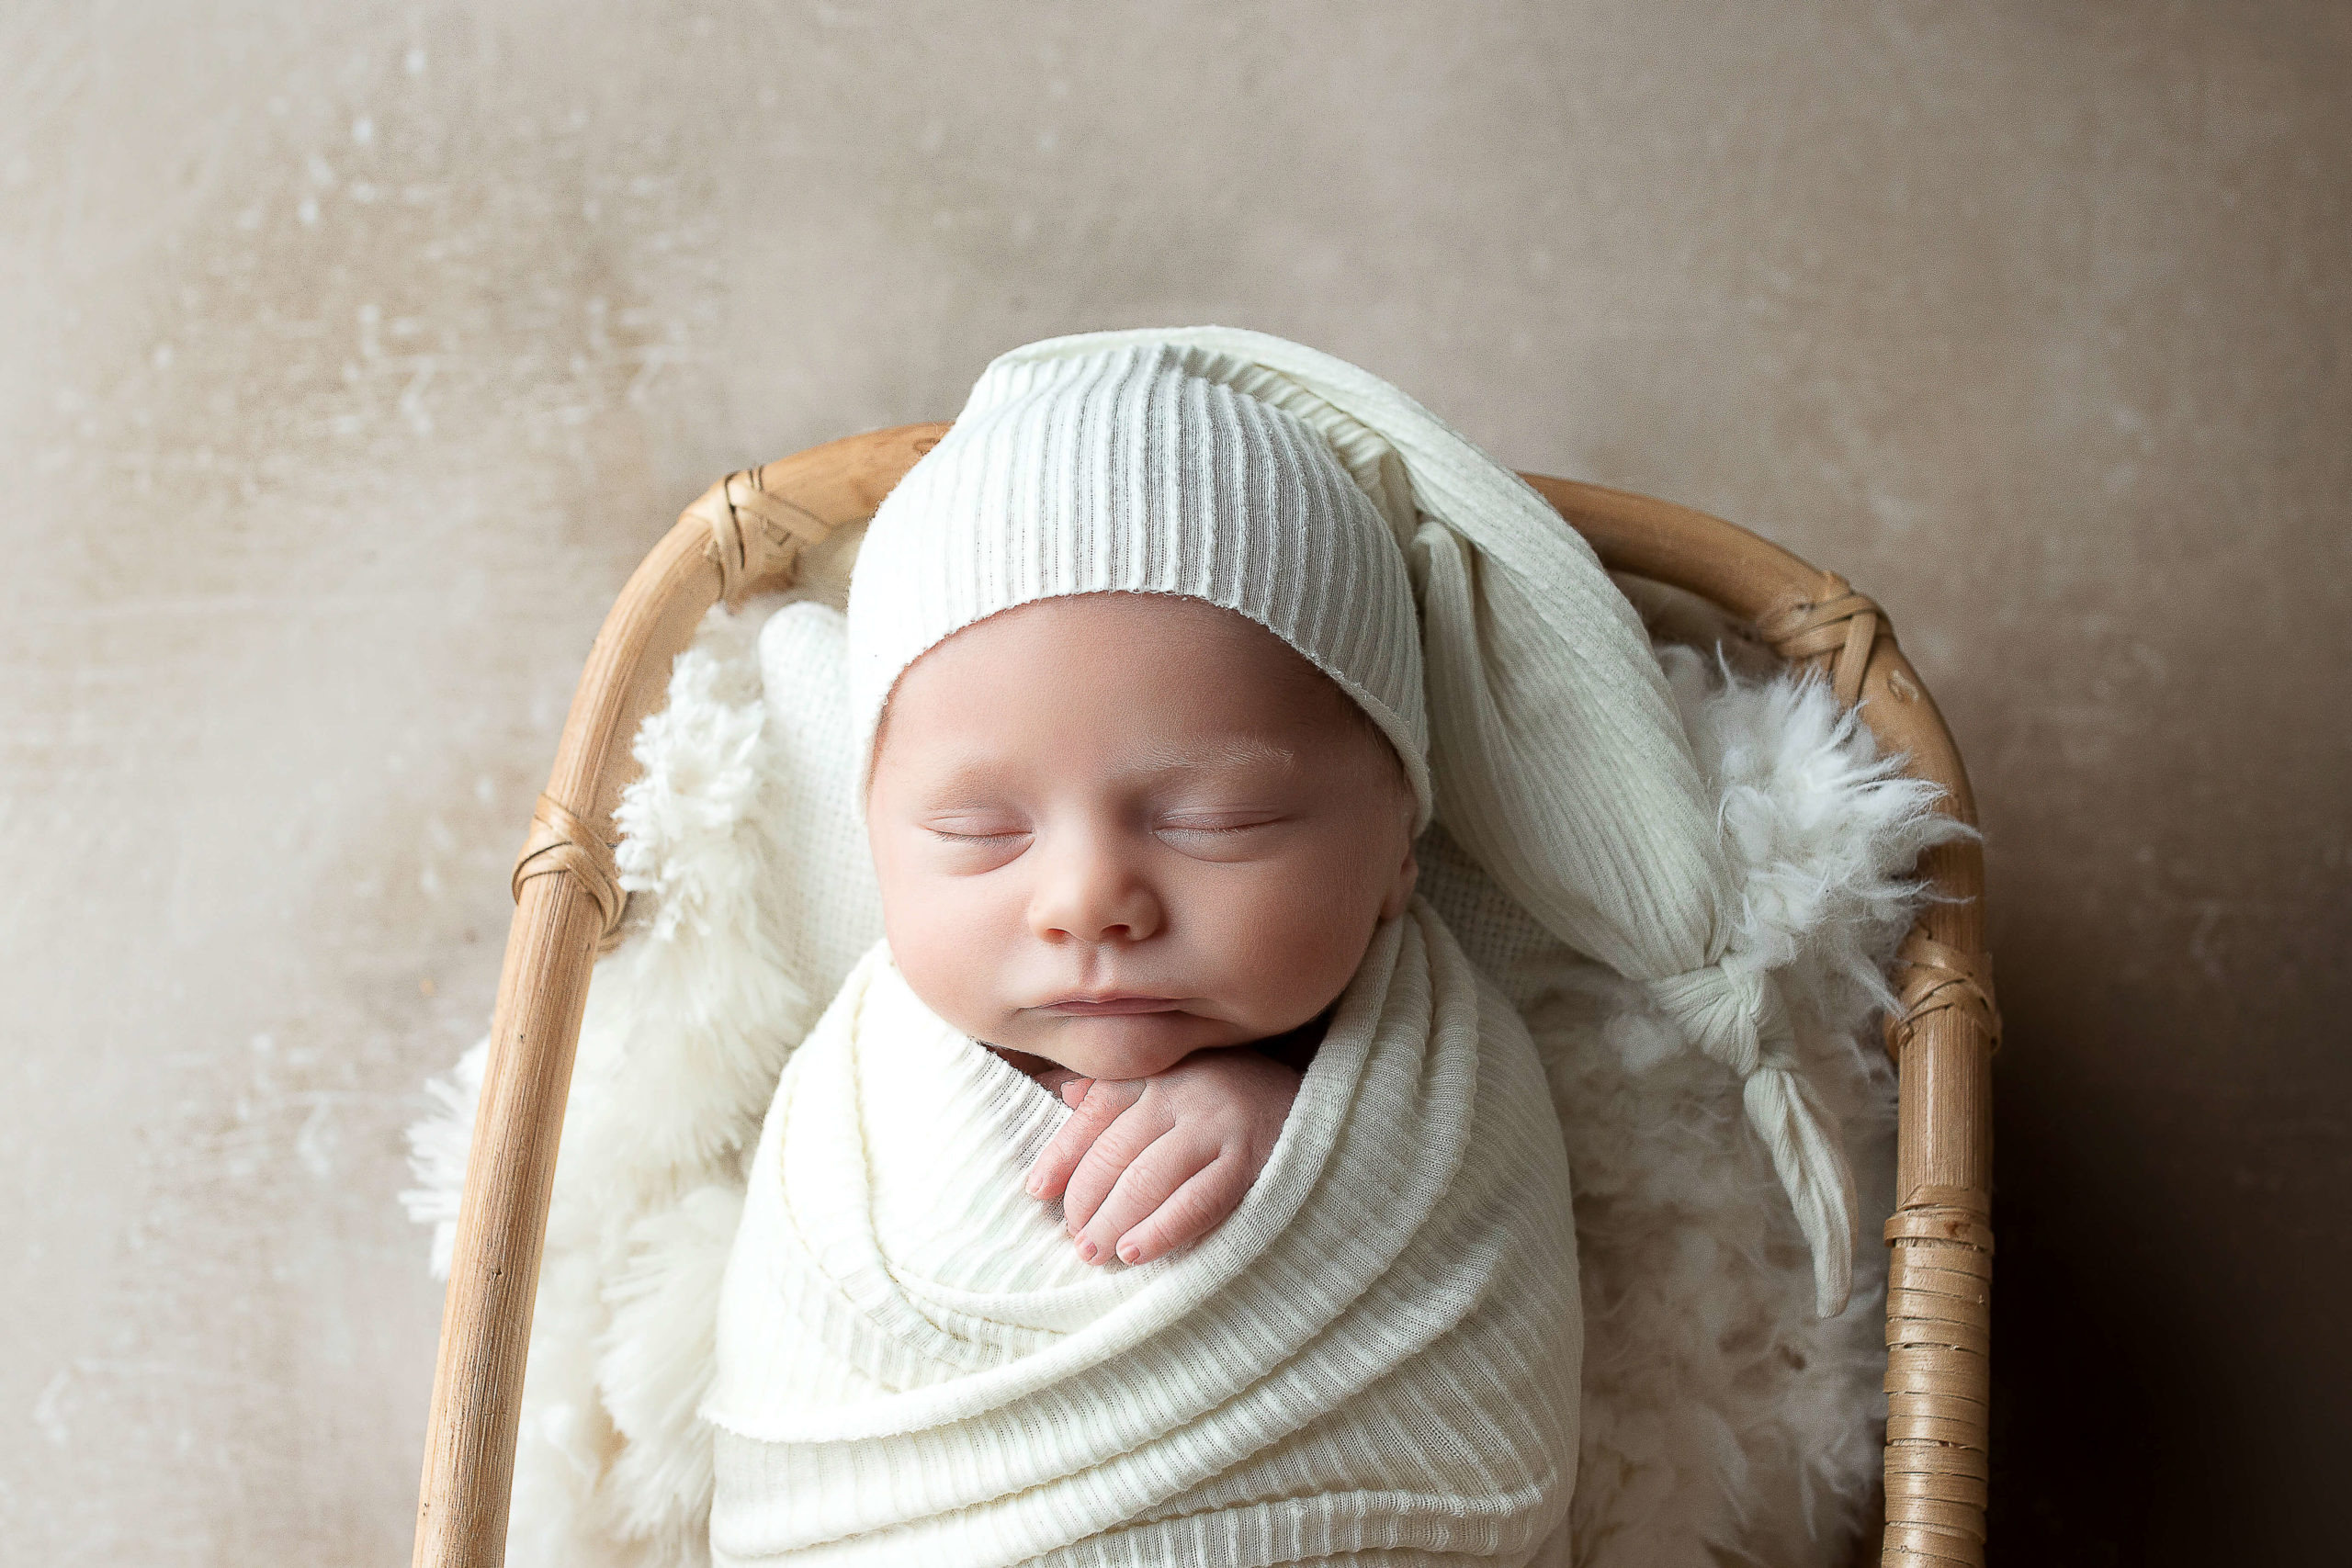 Newborn wrapped while wearing a sleepy cap